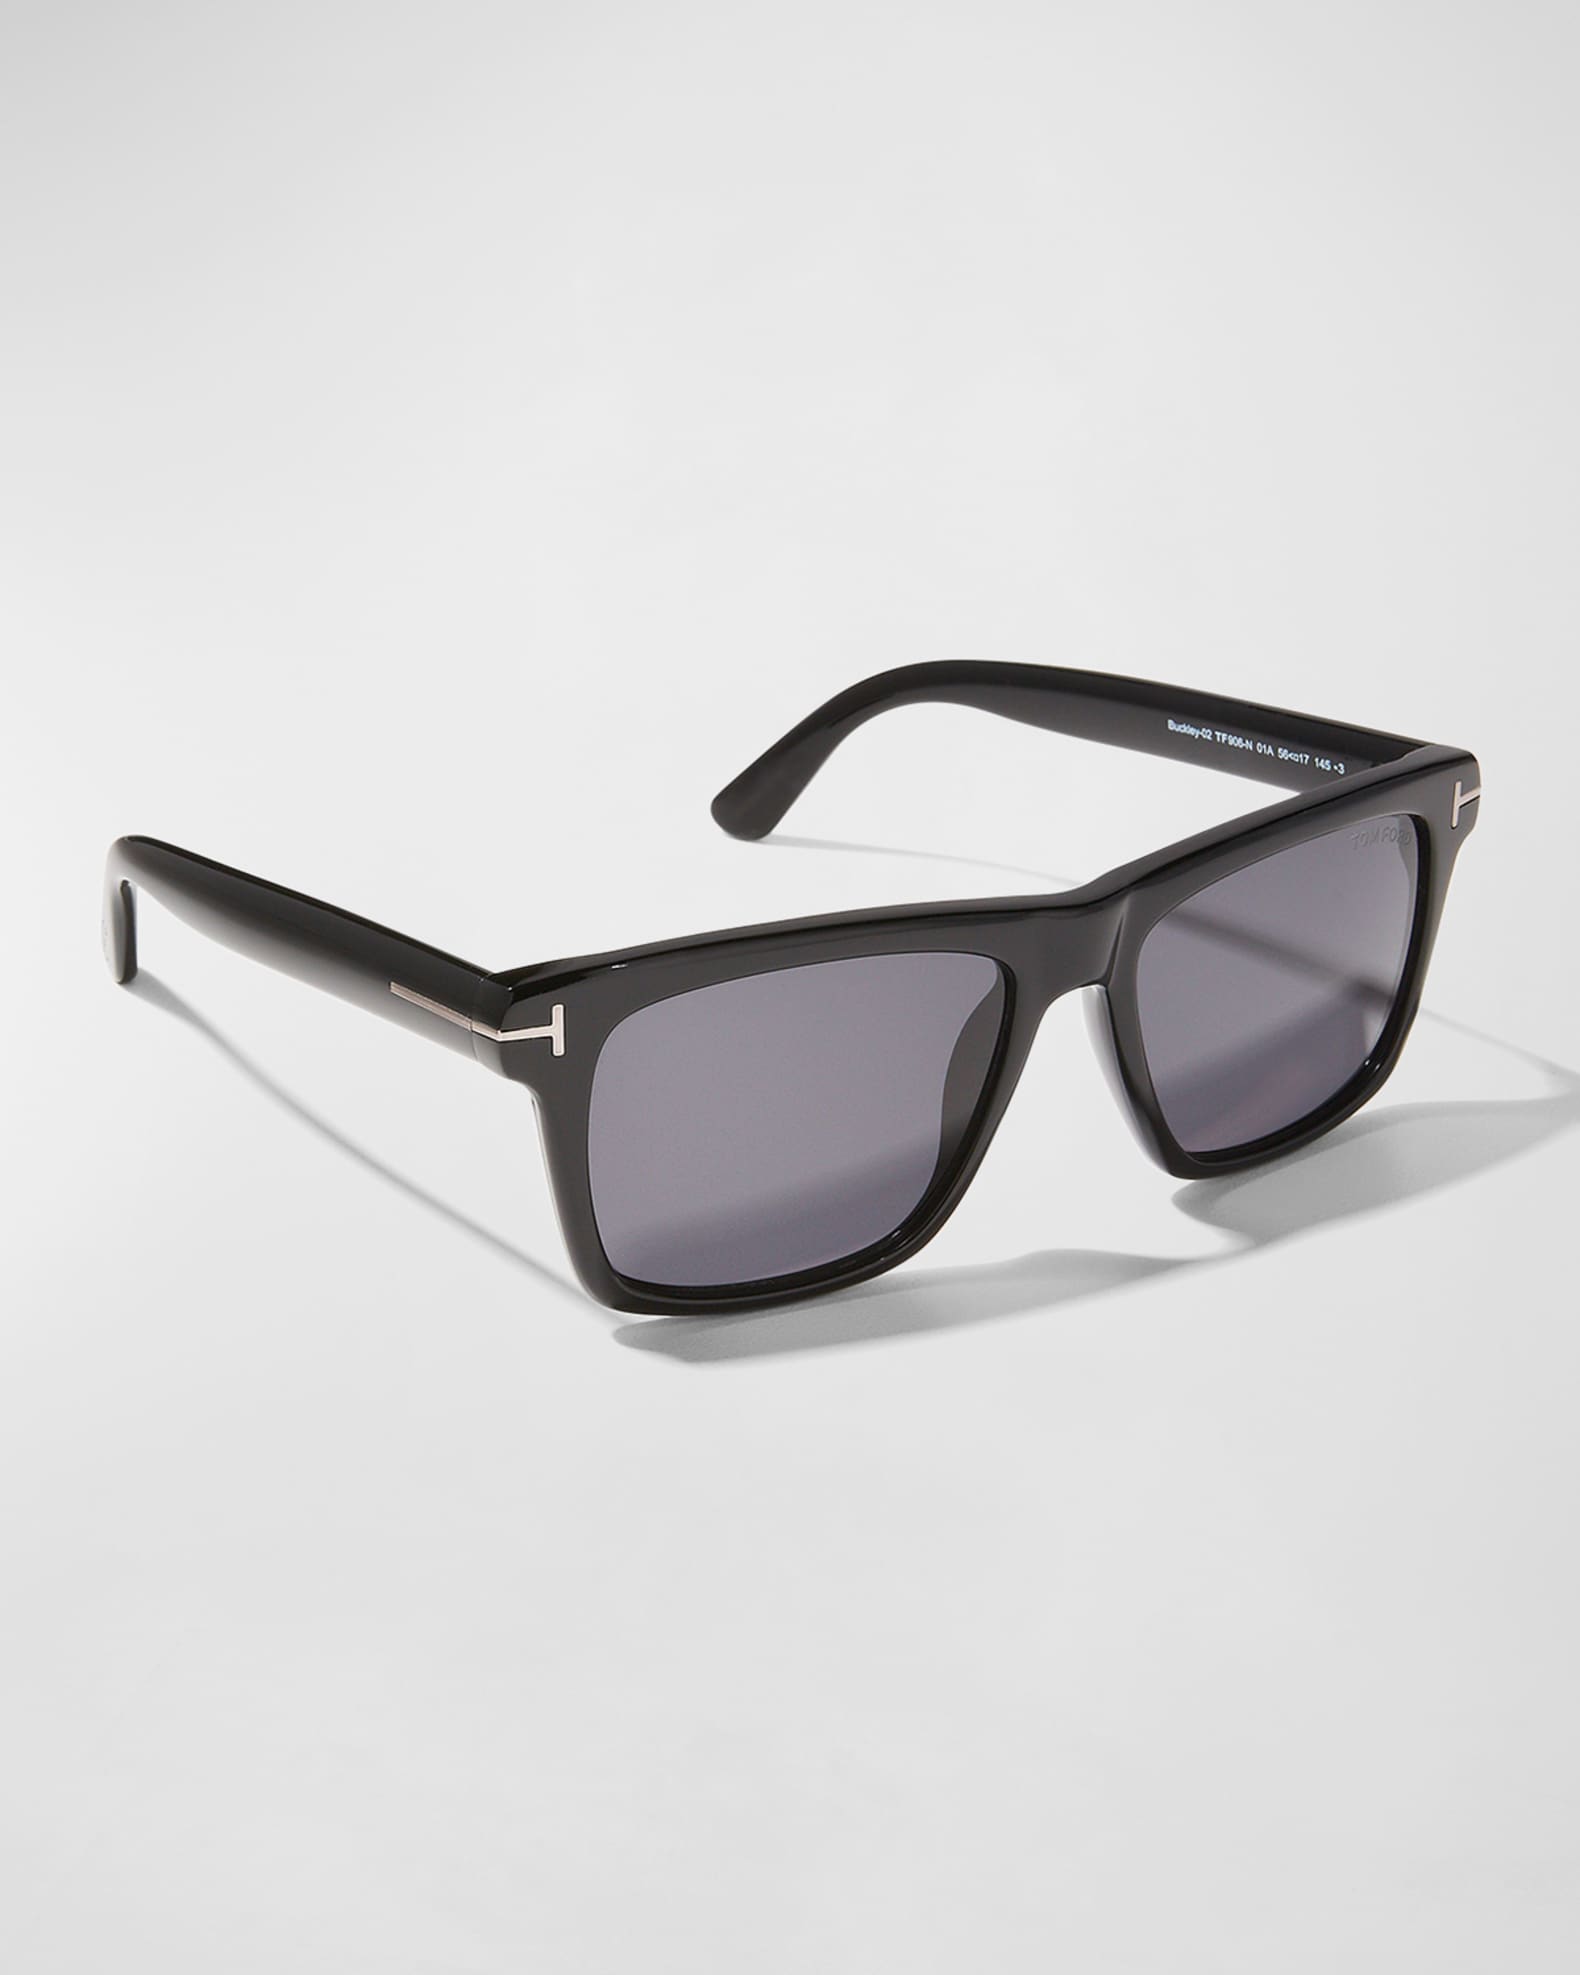 Tom Ford, Moncler, Versace: The most stylish men's sunglasses in